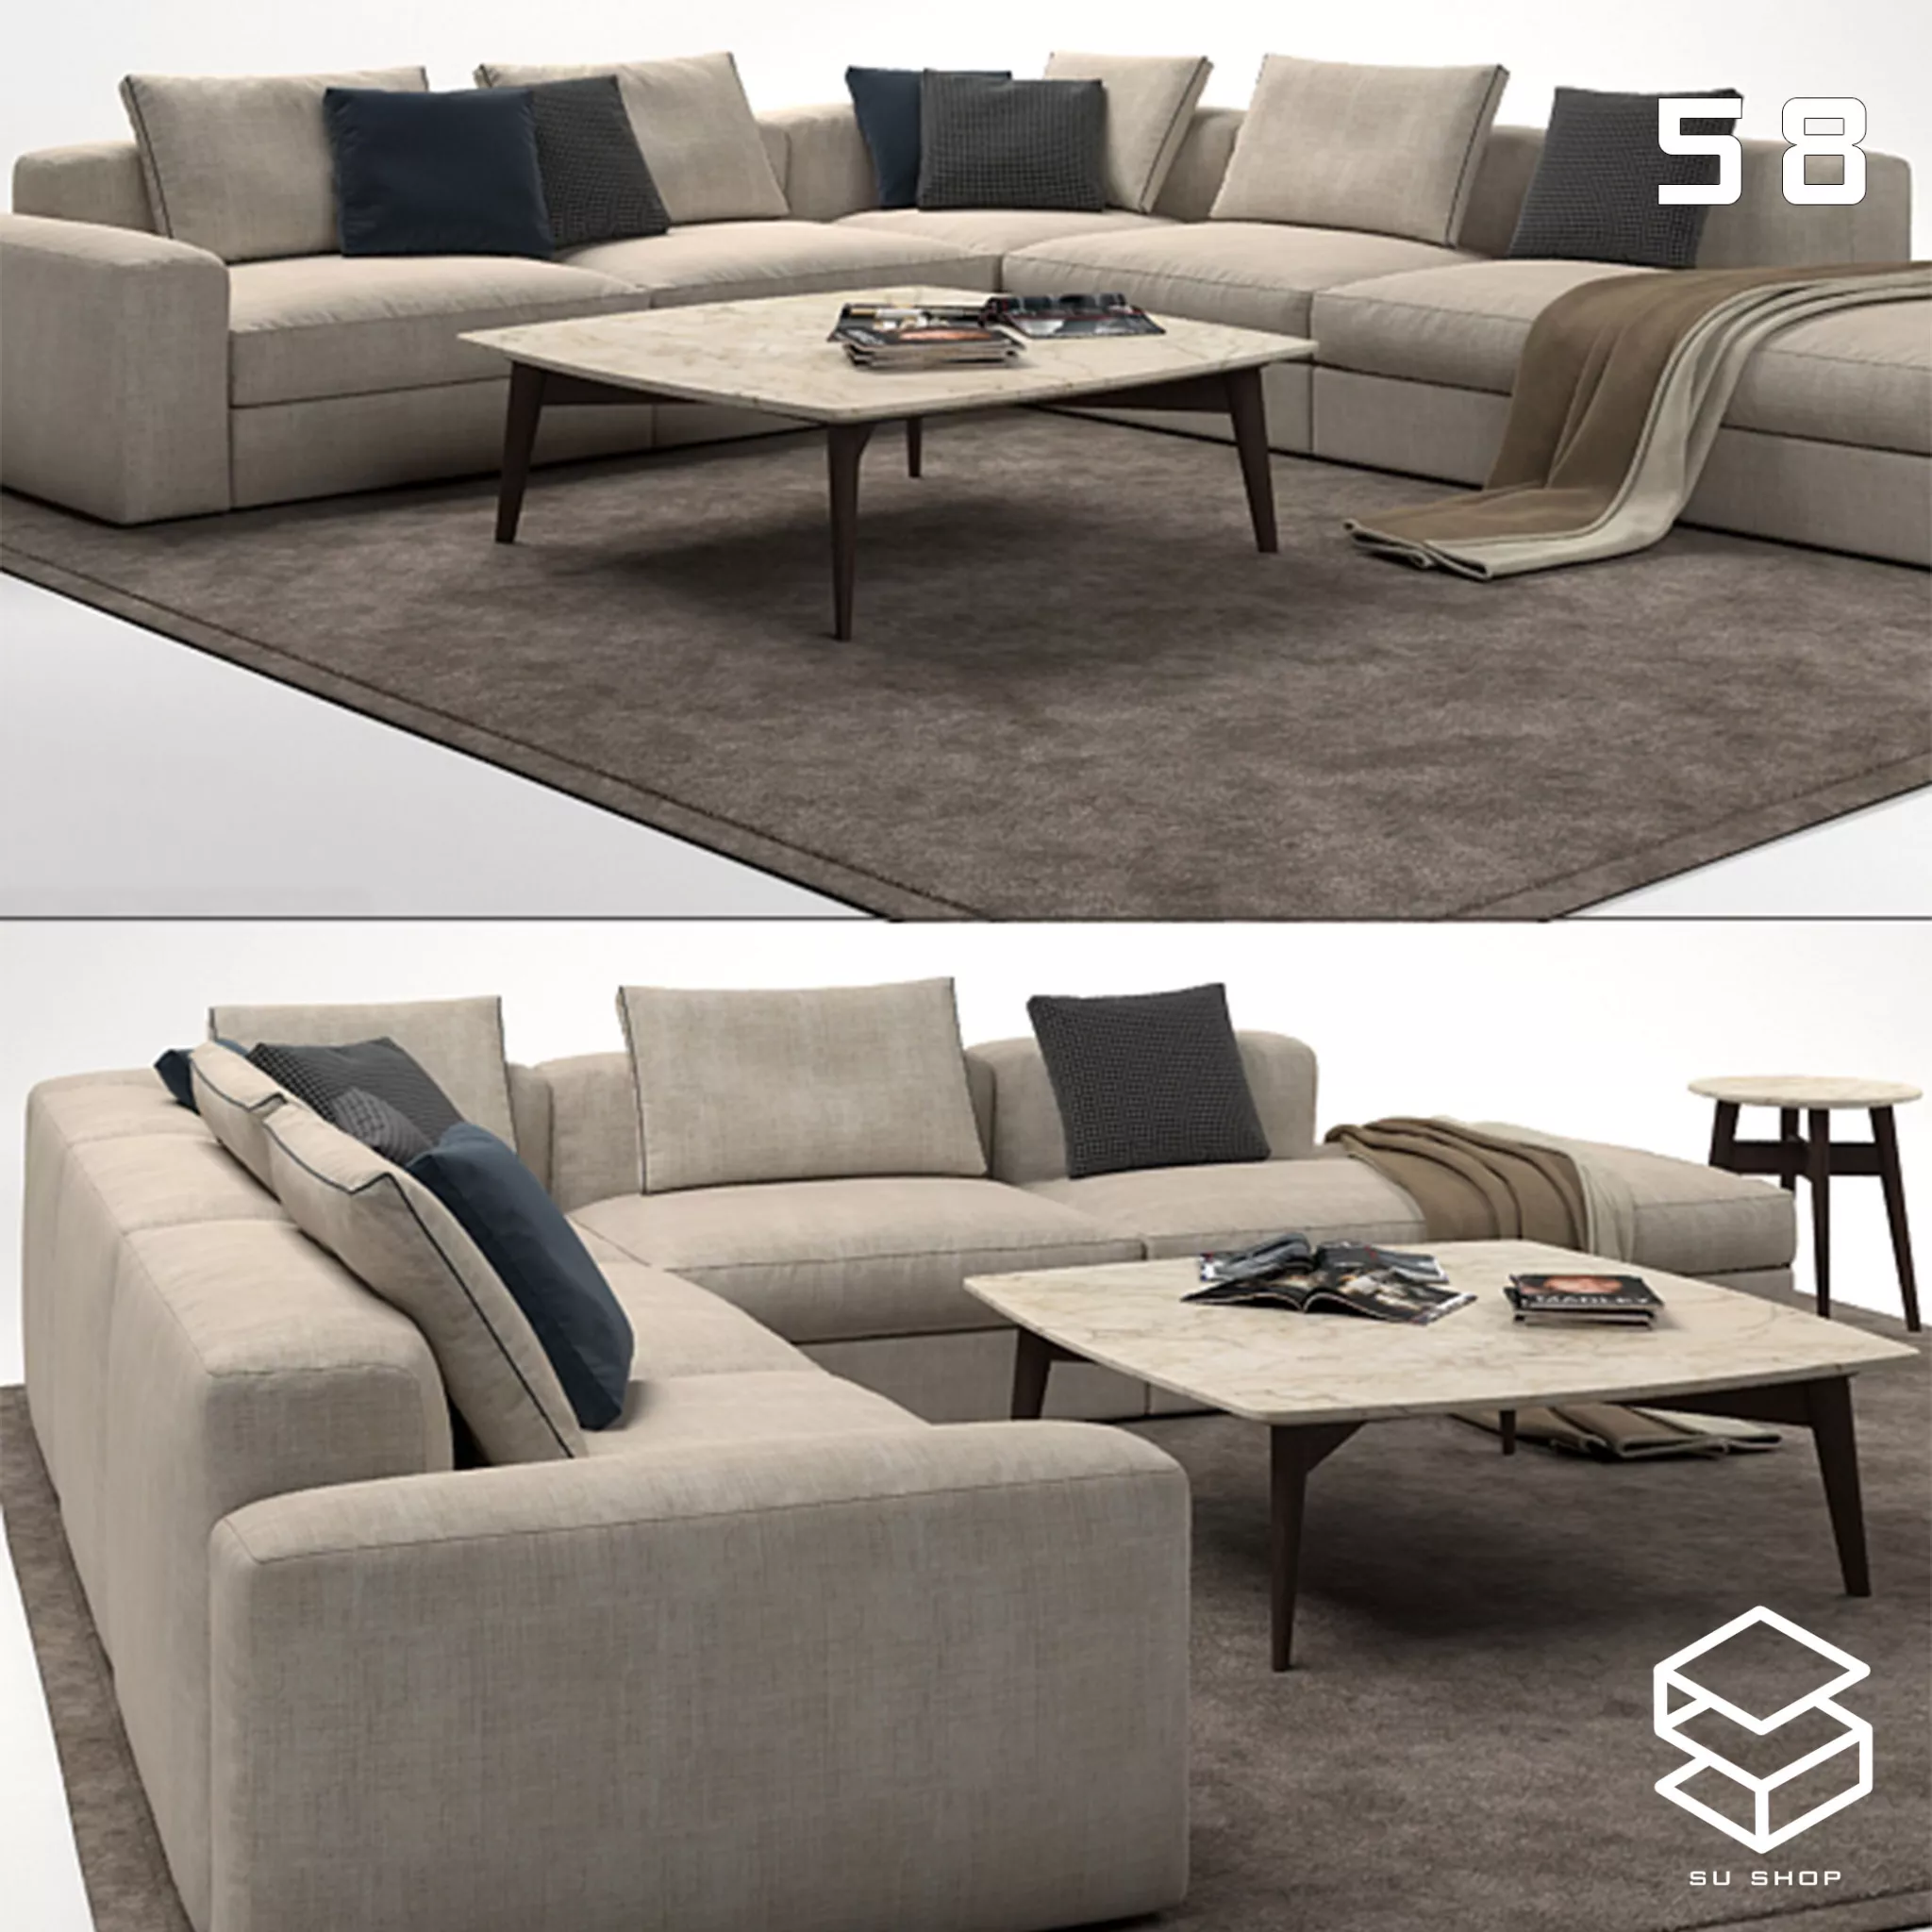 MODERN SOFA - SKETCHUP 3D MODEL - VRAY OR ENSCAPE - ID13683